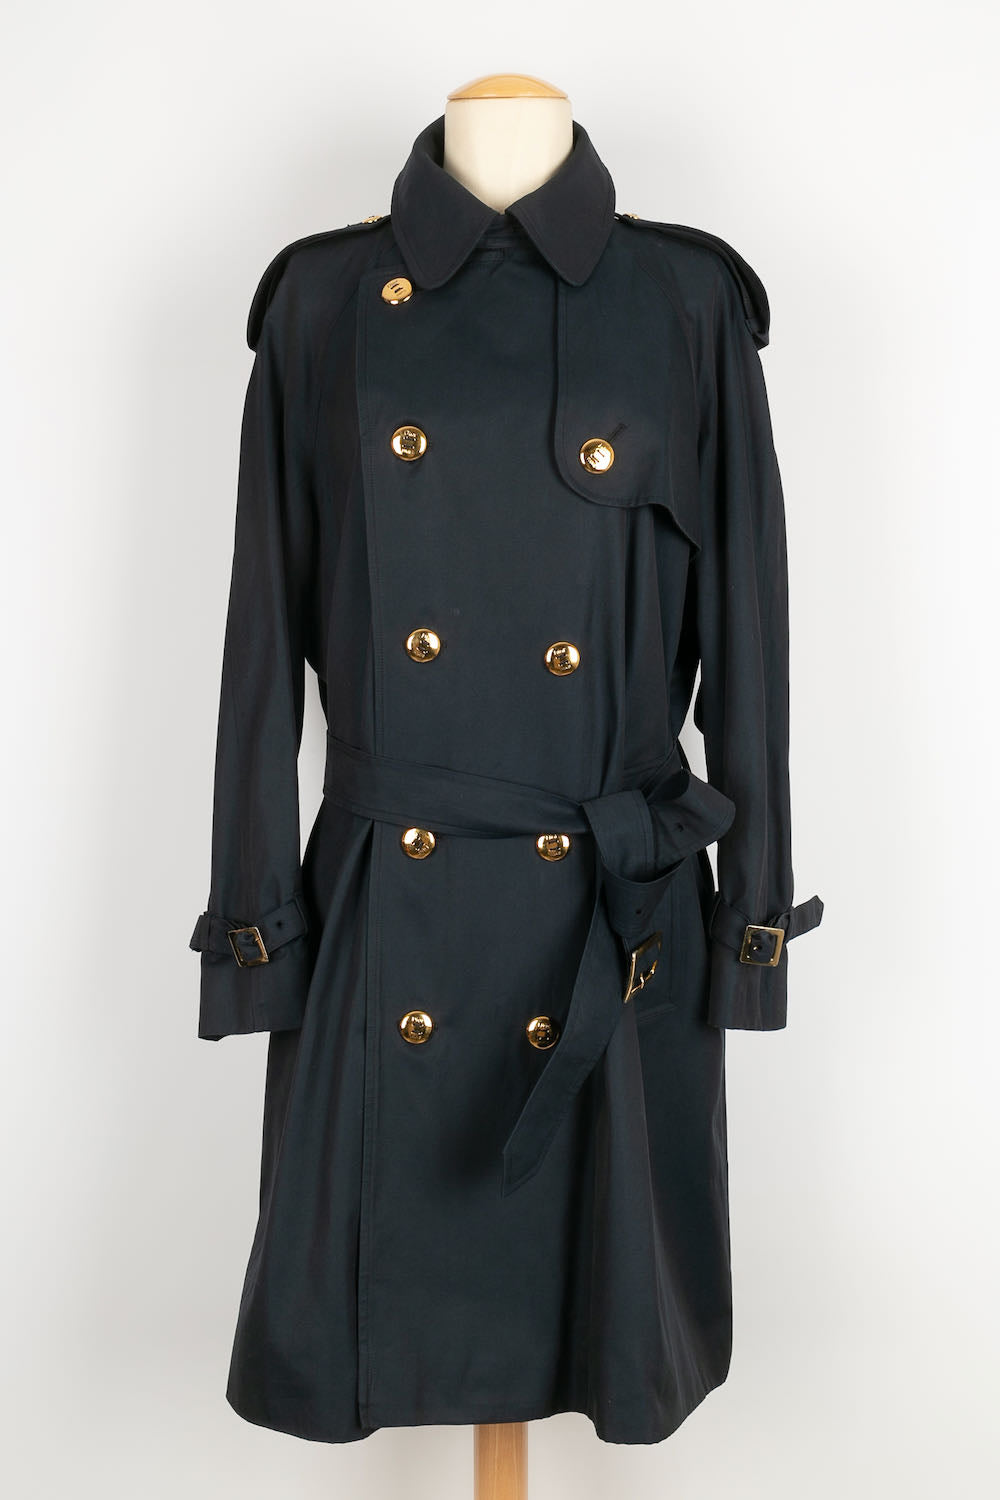 Vintage Christian Dior Trench Coat — quell